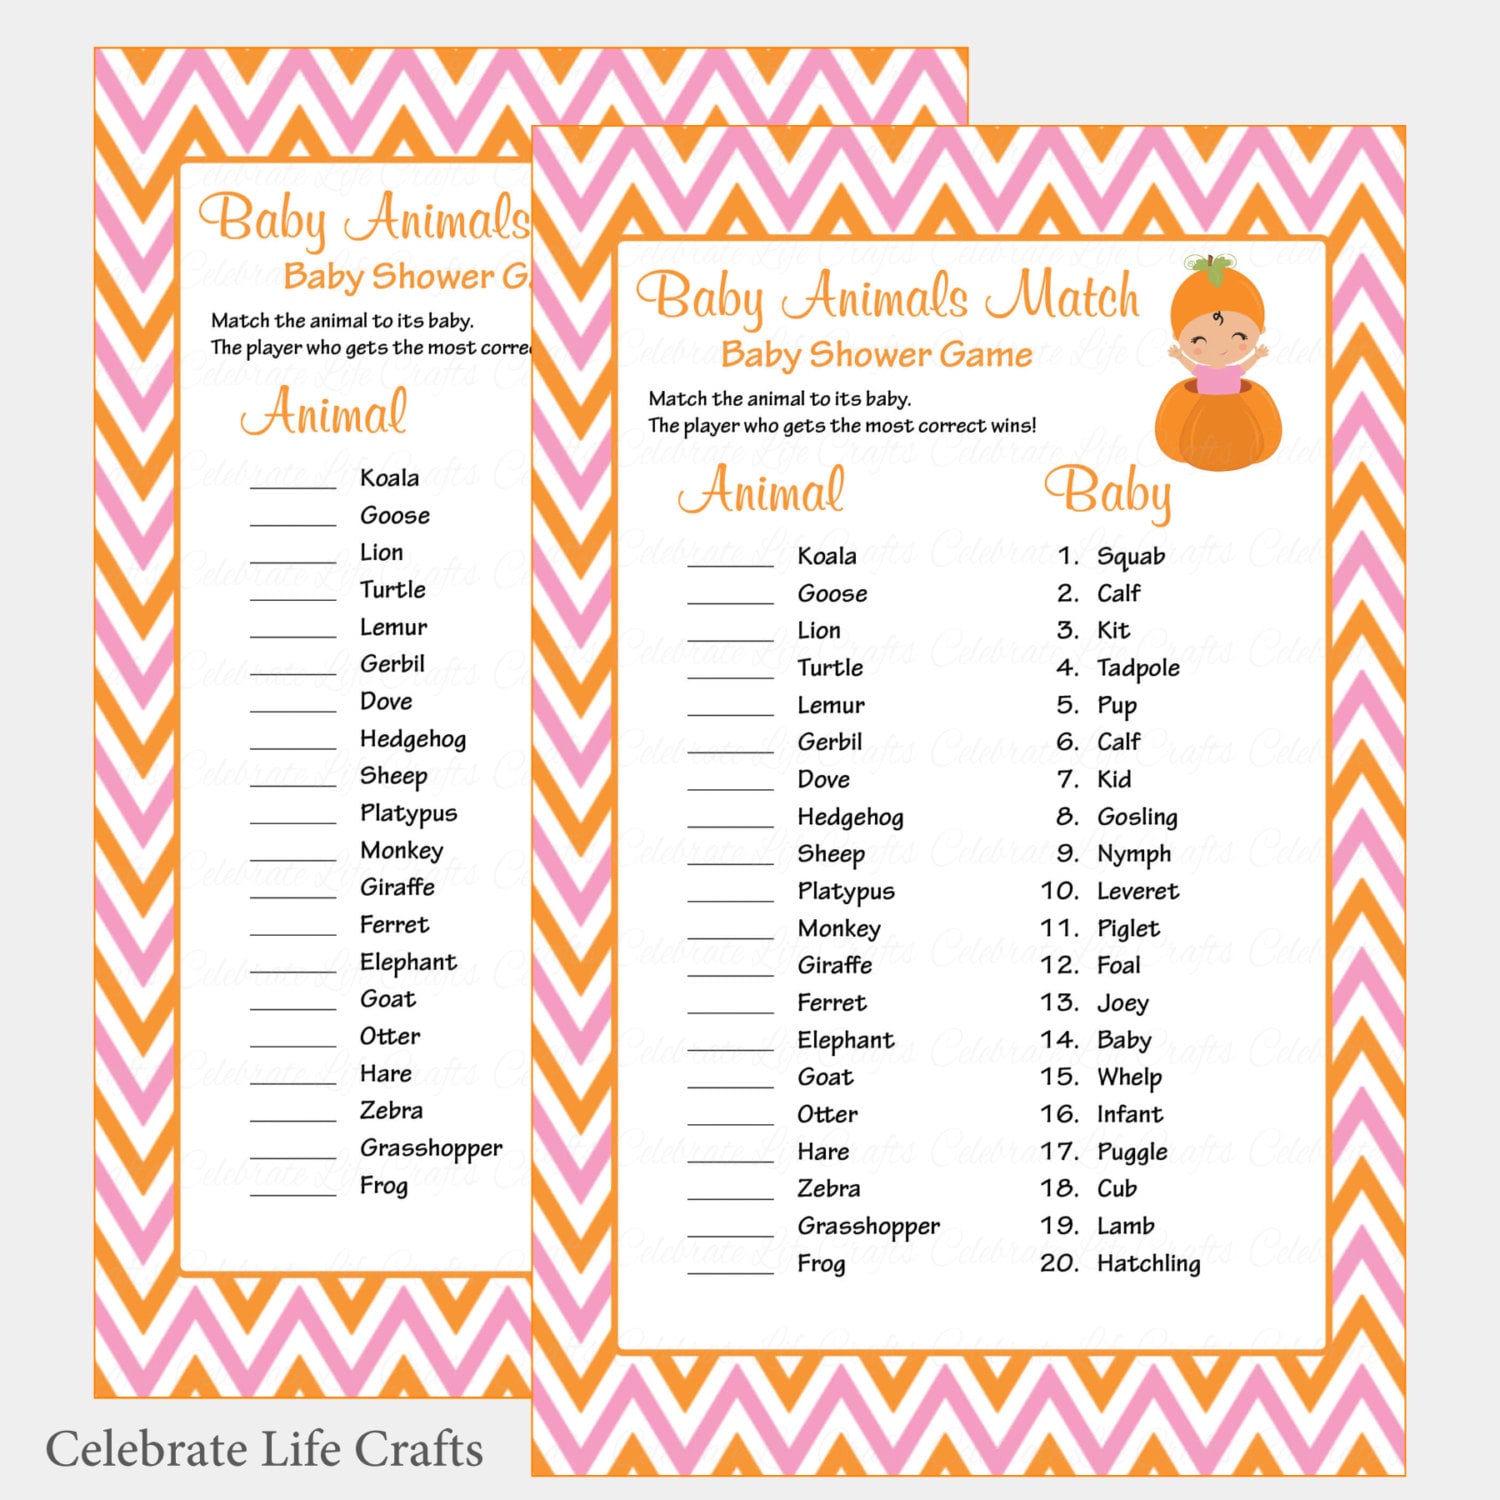 baby-animals-match-game-with-answer-key-printable-baby